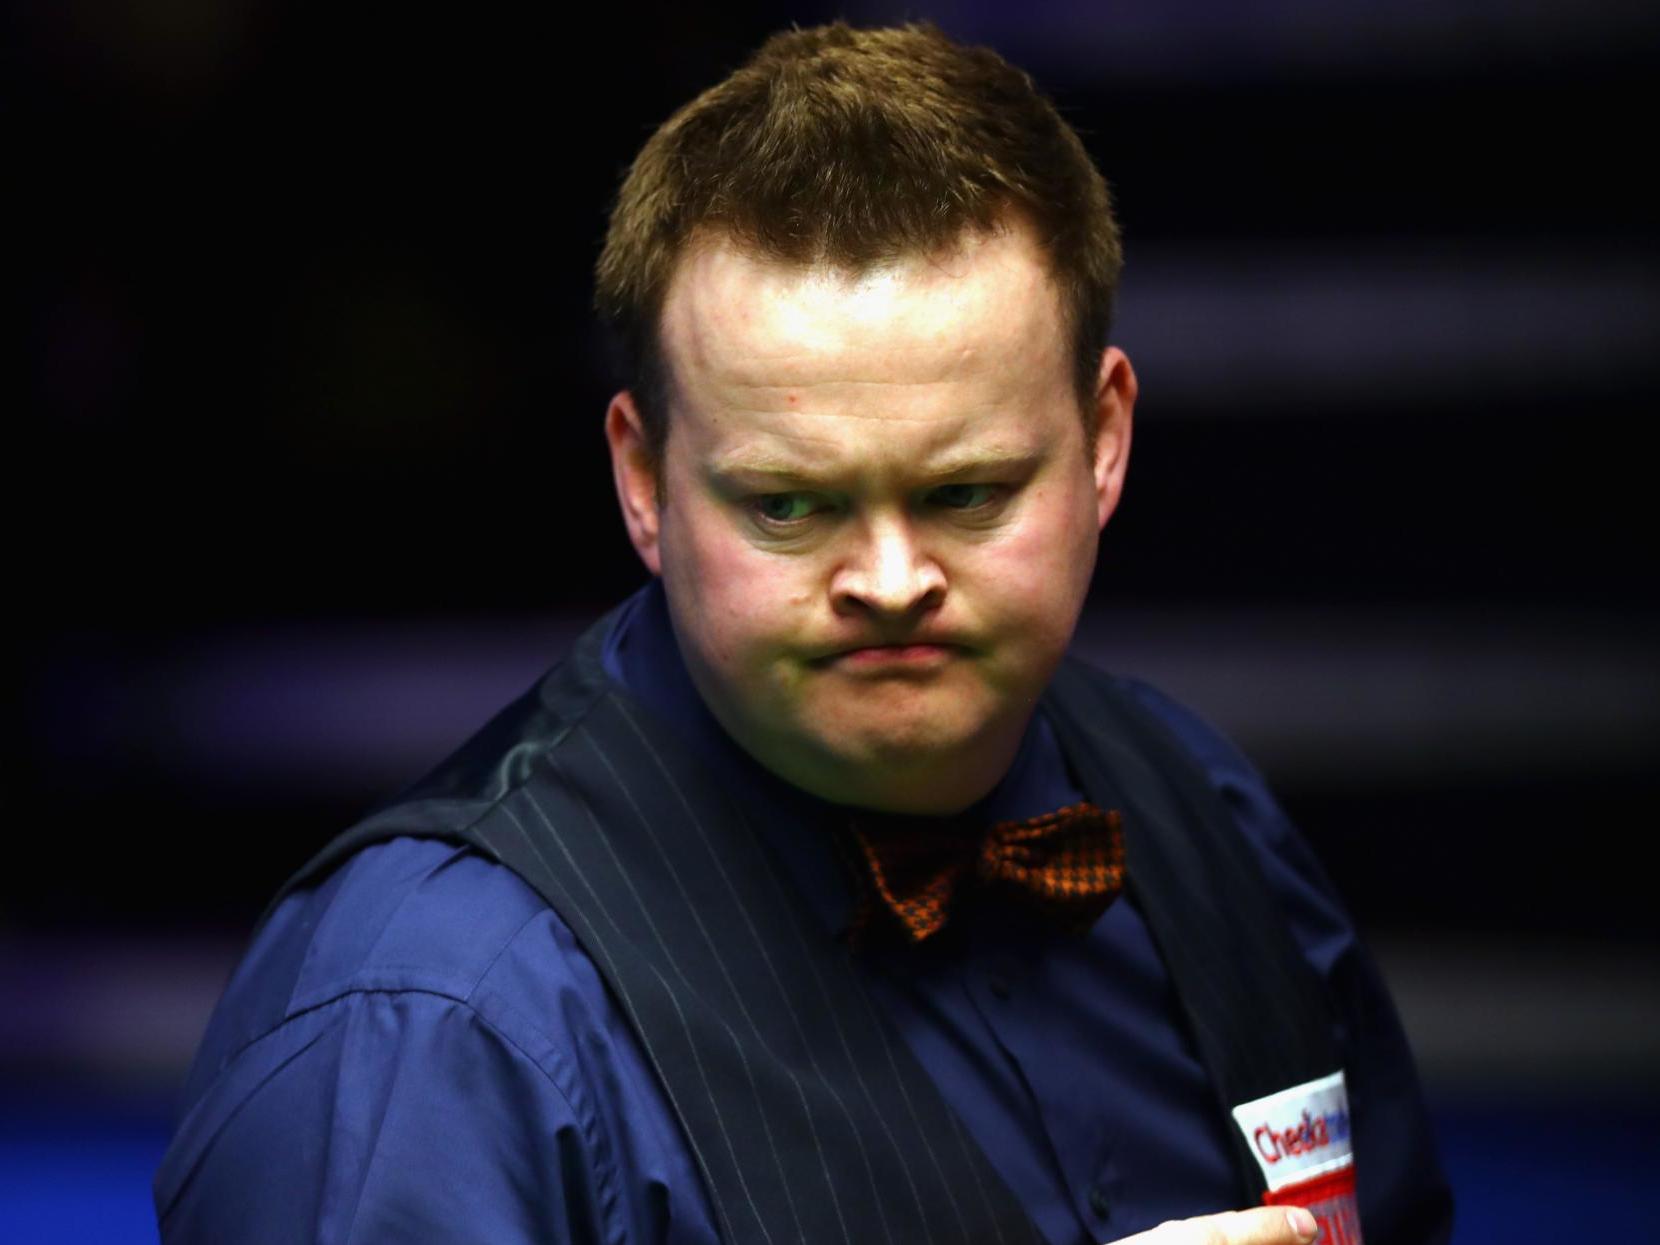 Shaun Murphy is out of the World Snooker Championship